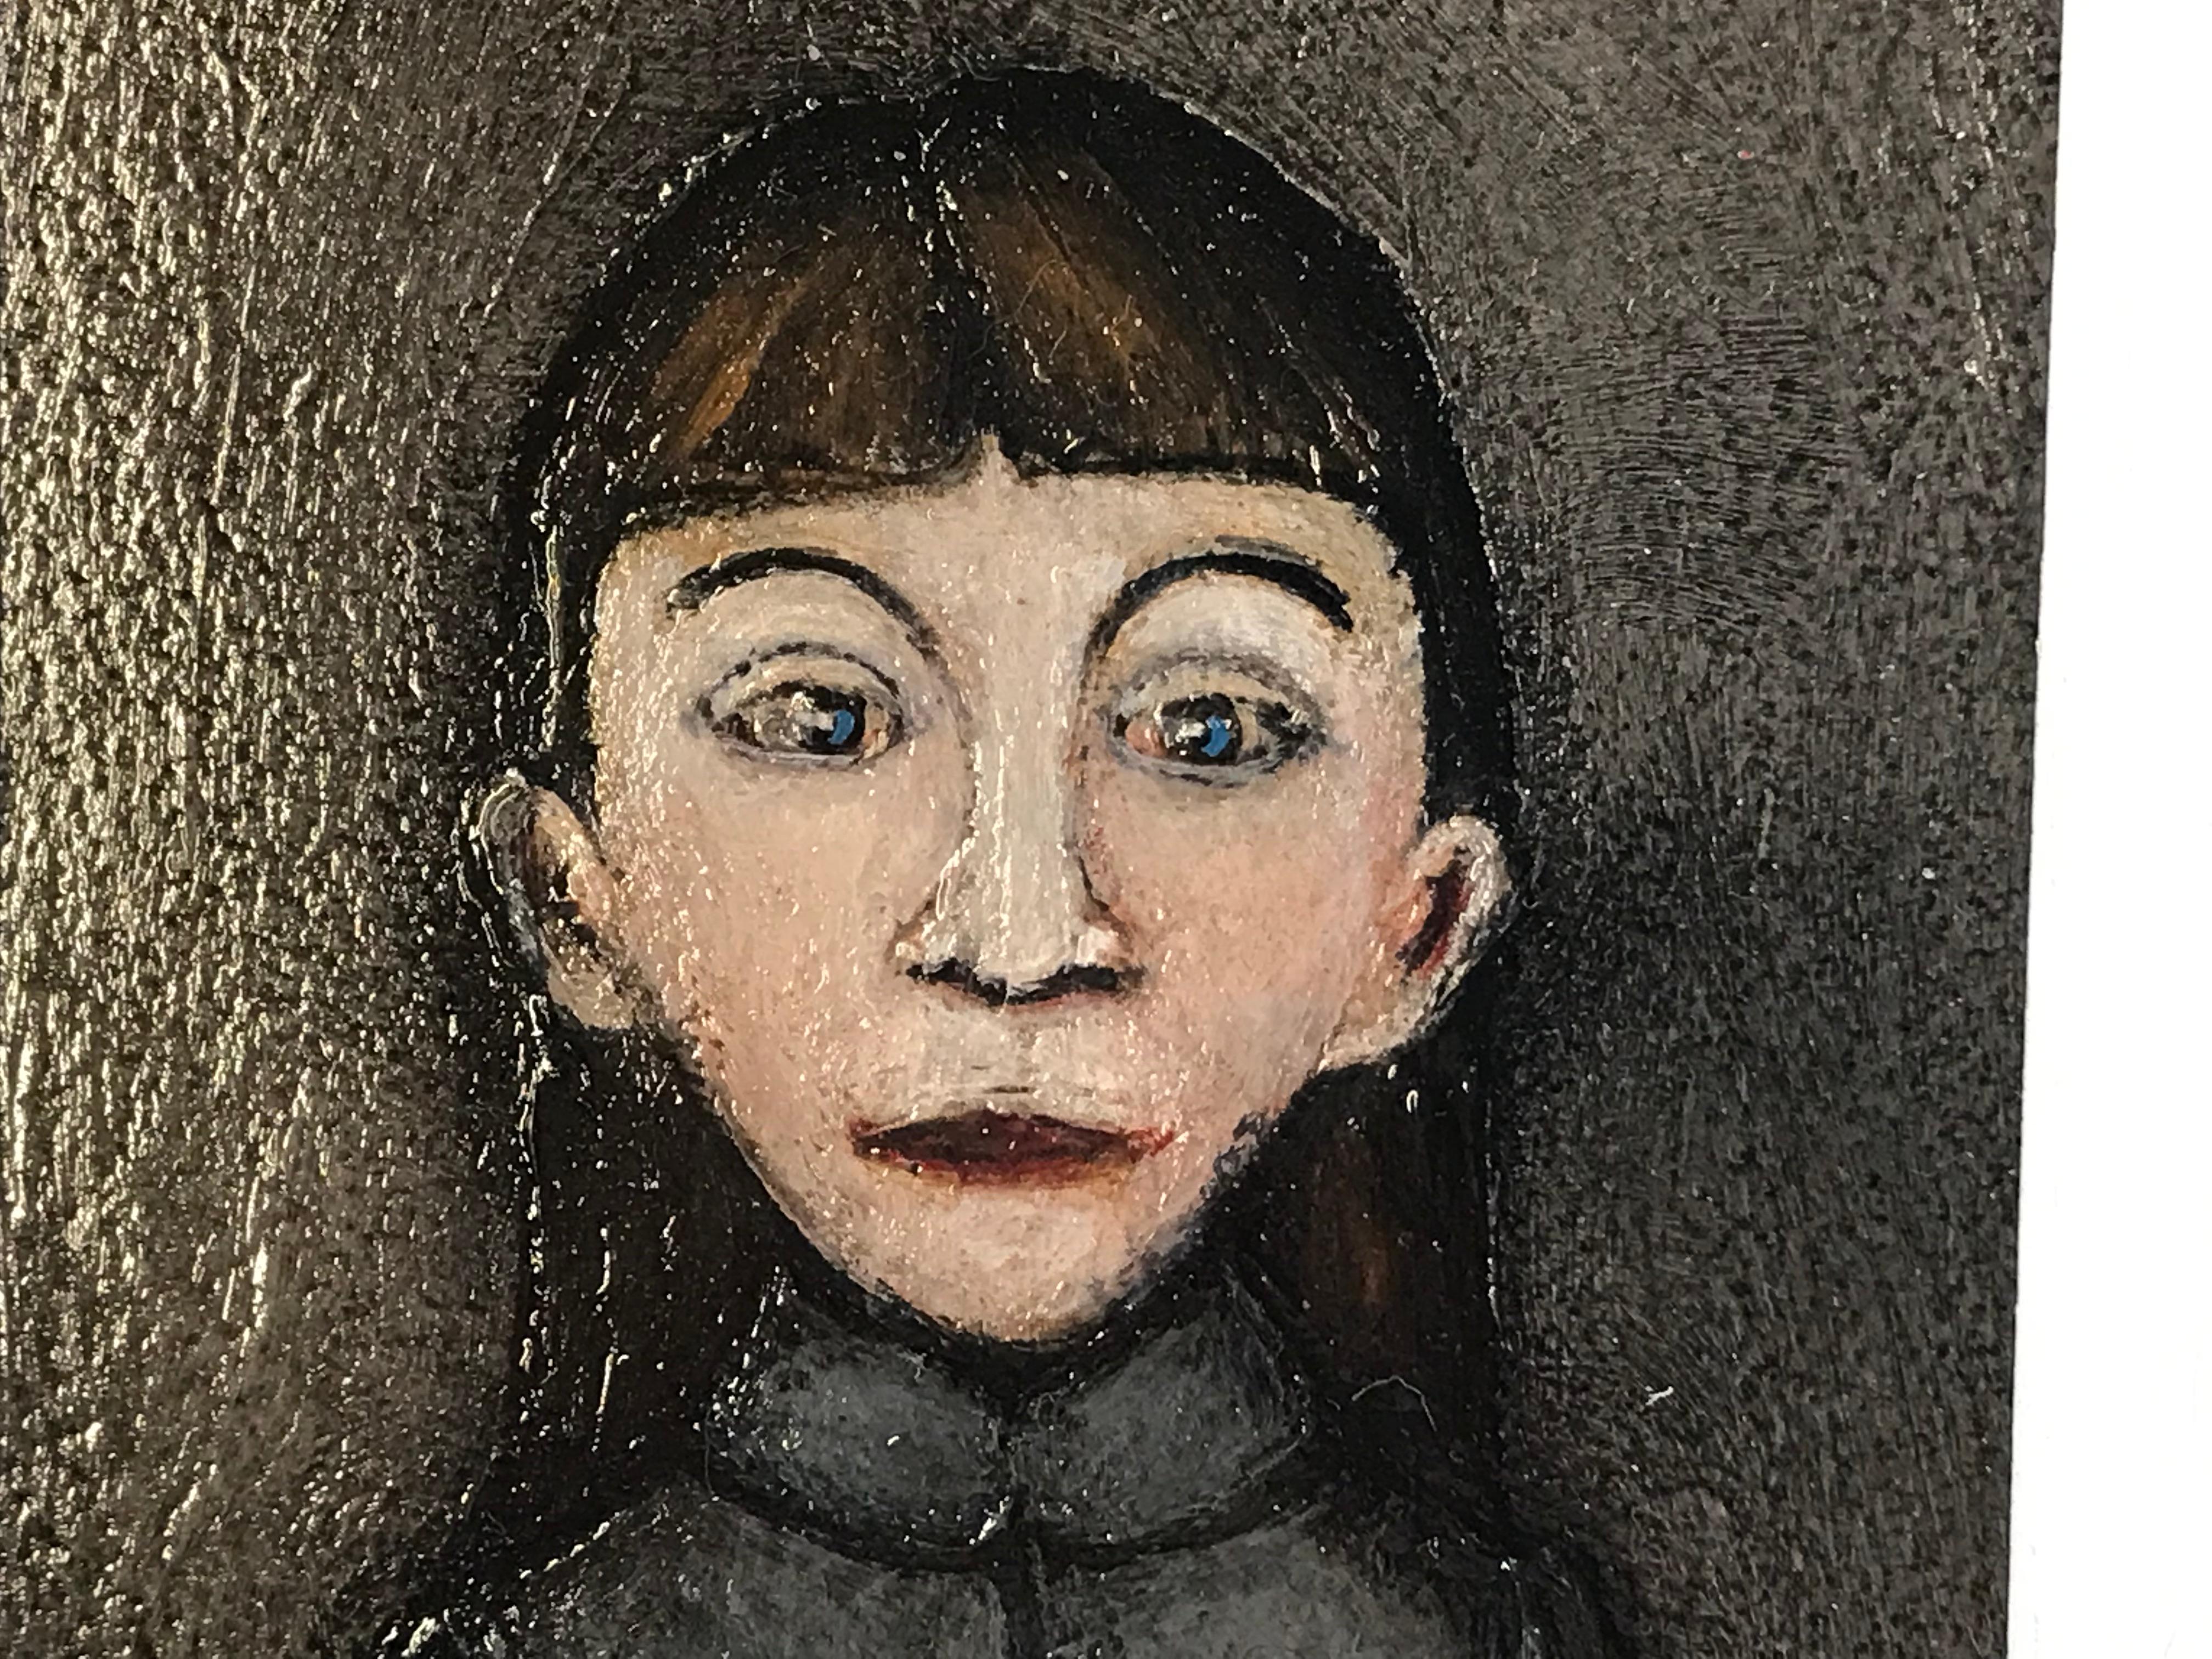 Original painting of Young girl in grey jacket. Sean uses very toned down colours but draws the attention to the portrait of a young girl with grey toned jacket on a darker background.

Additional information:
Acrylic paint on Canvas
30 H x 26 W x